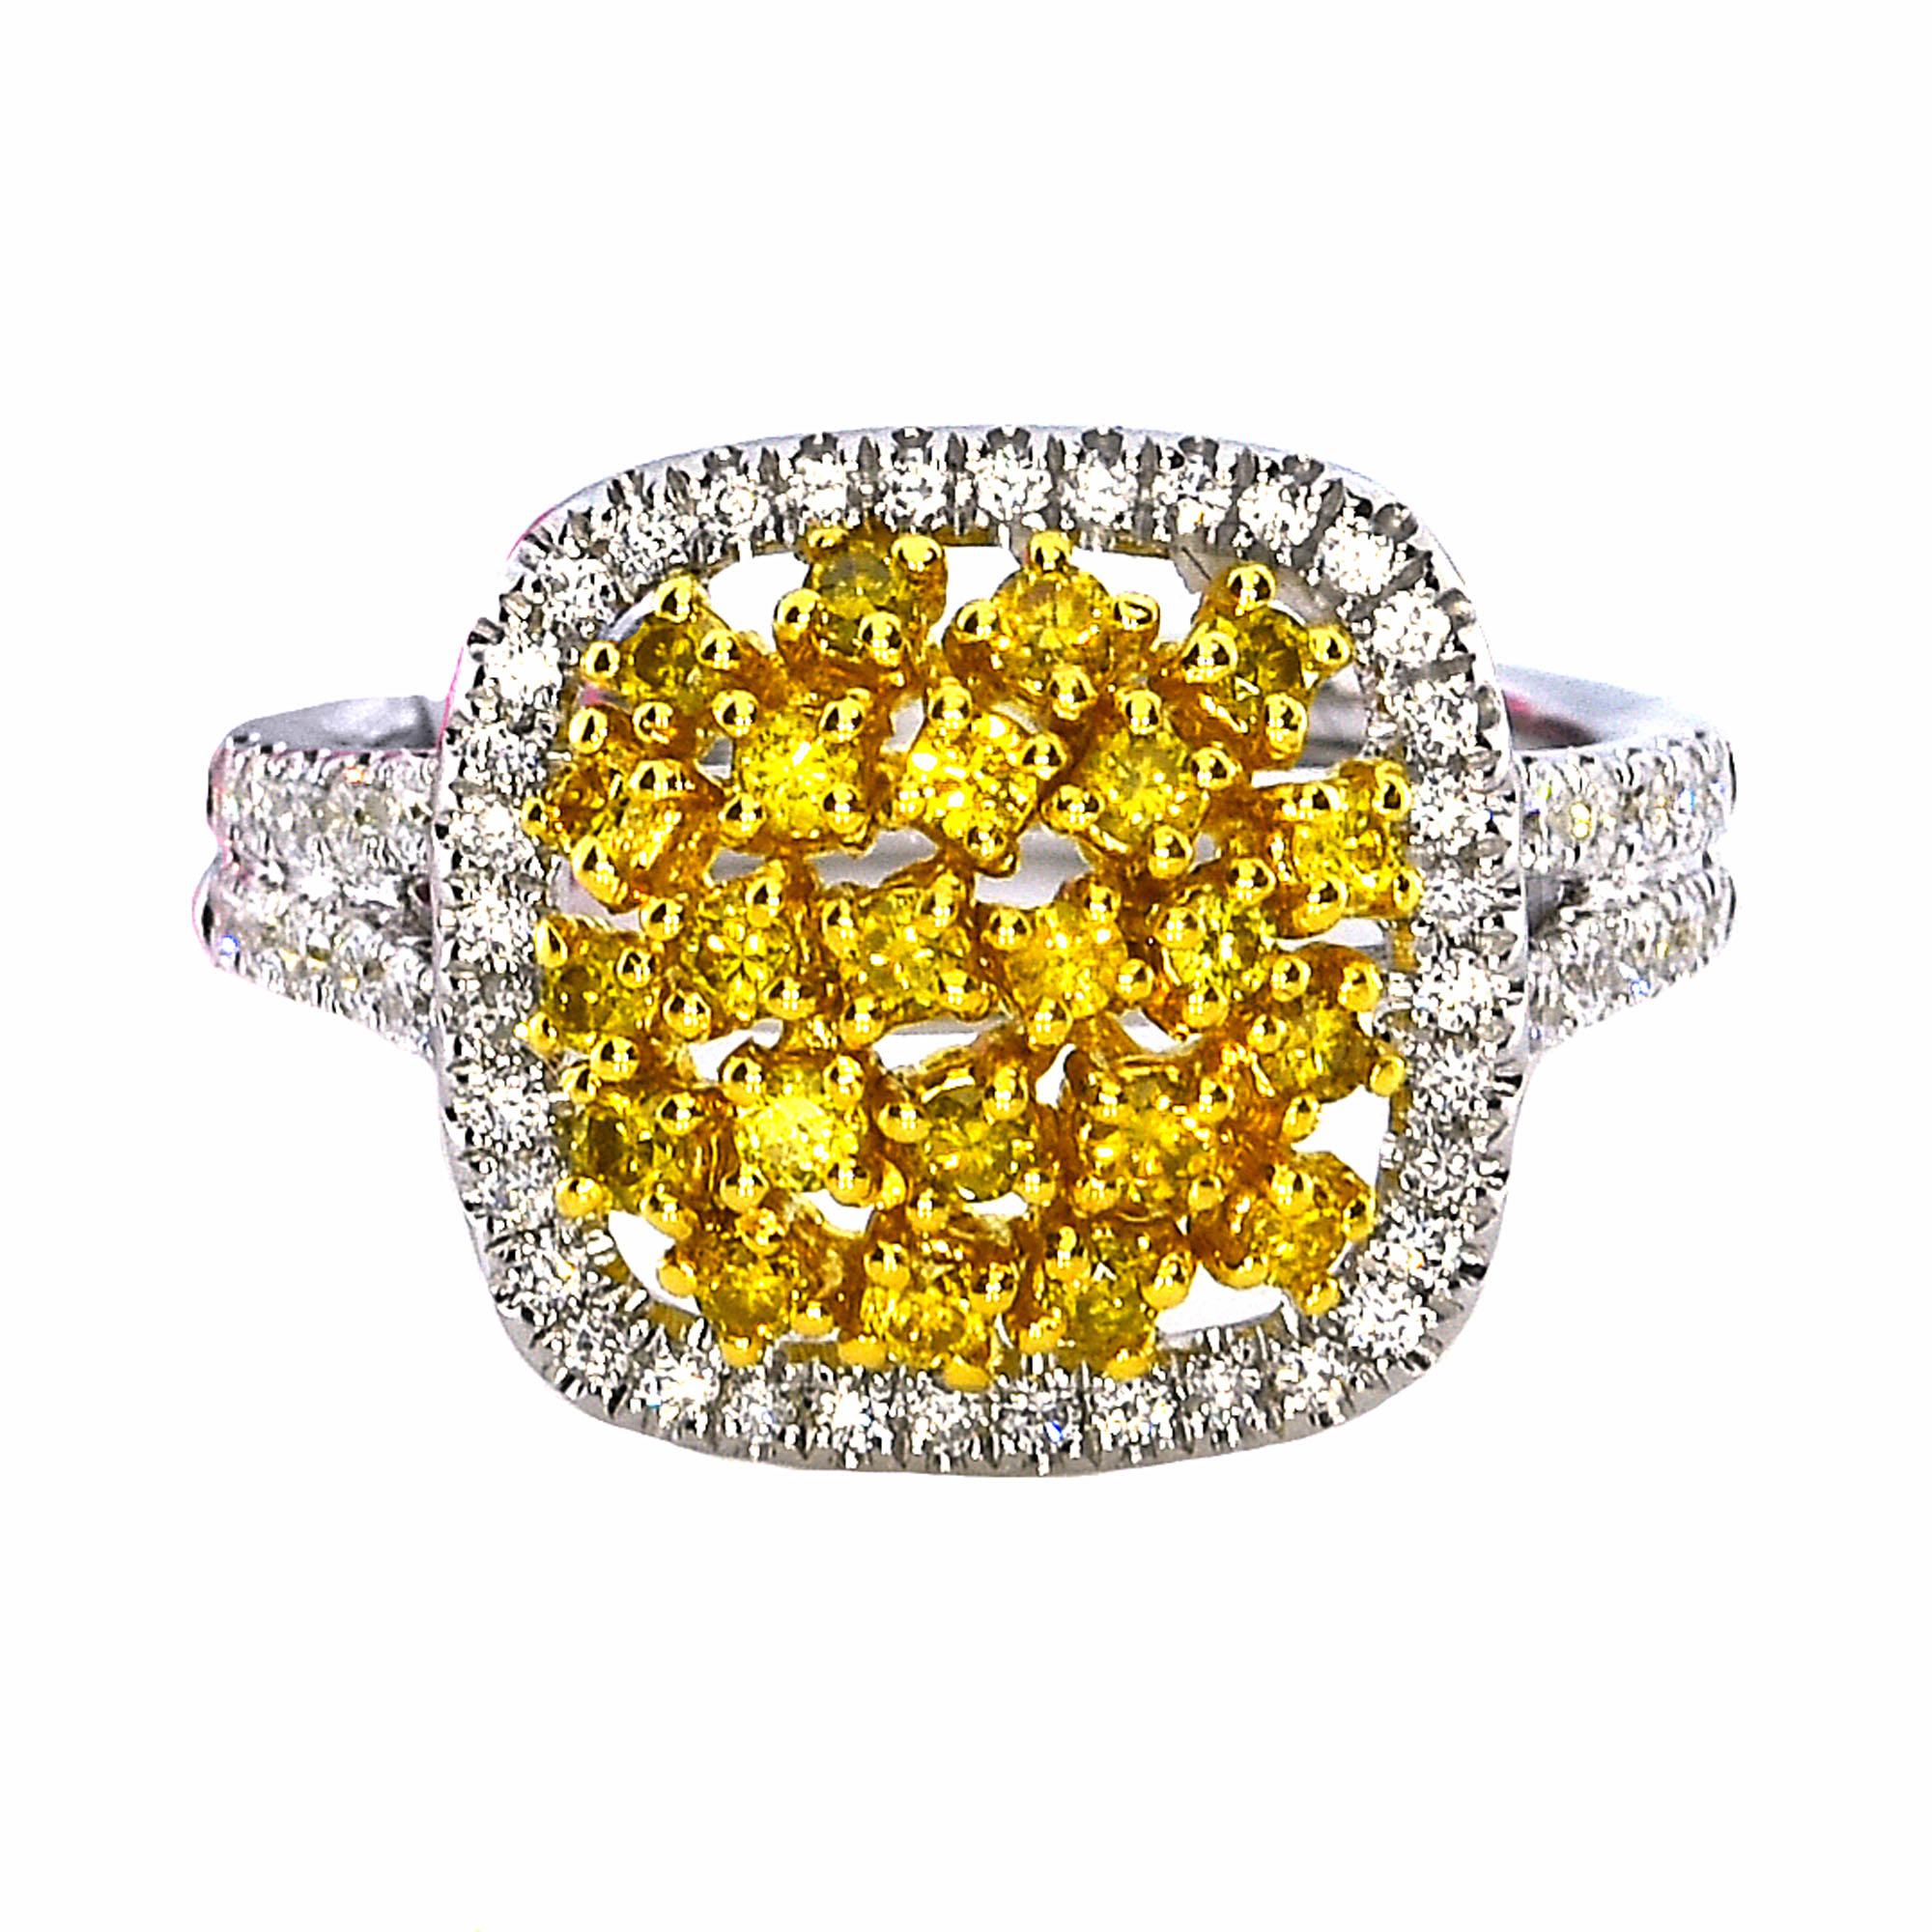 Stylish Fancy Intense Yellow and White Diamond Cluster Ring
Total Carat Weight: 0.99 Carats (total 22 stones)
White Diamonds: 0.56 Carats (total 64 stones)
Yellow Diamonds: 0.43 Carats (total 22 stones)
Setting: 6.44 grams, 18k White Gold